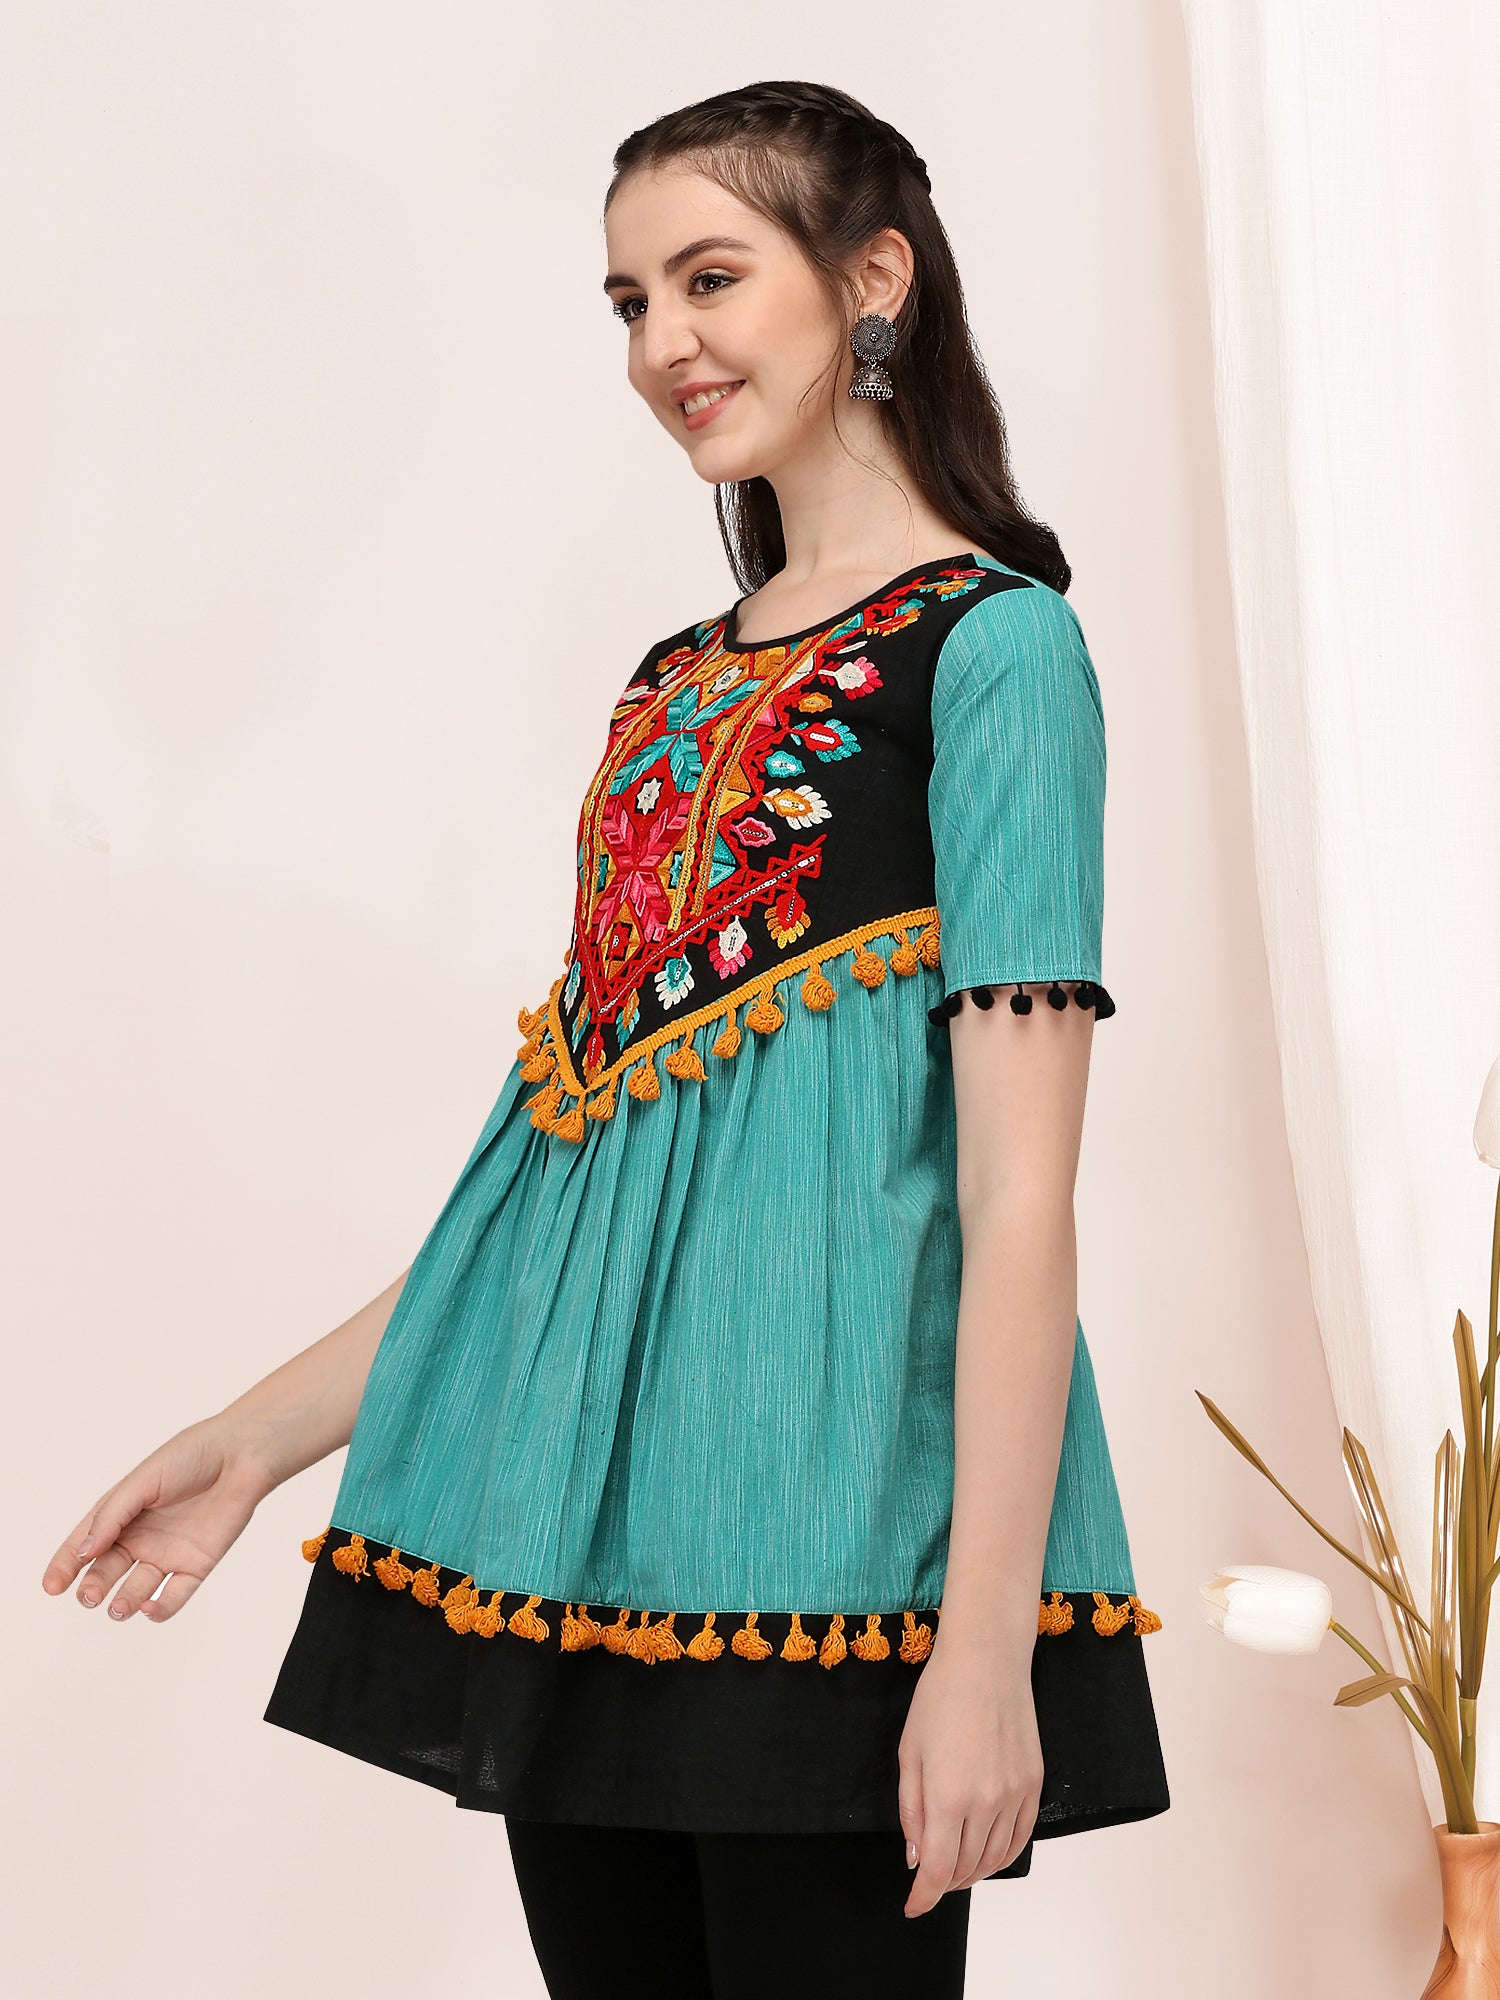 Women's Turquoise and black embroidered long kedia top - MESMORA FASHION